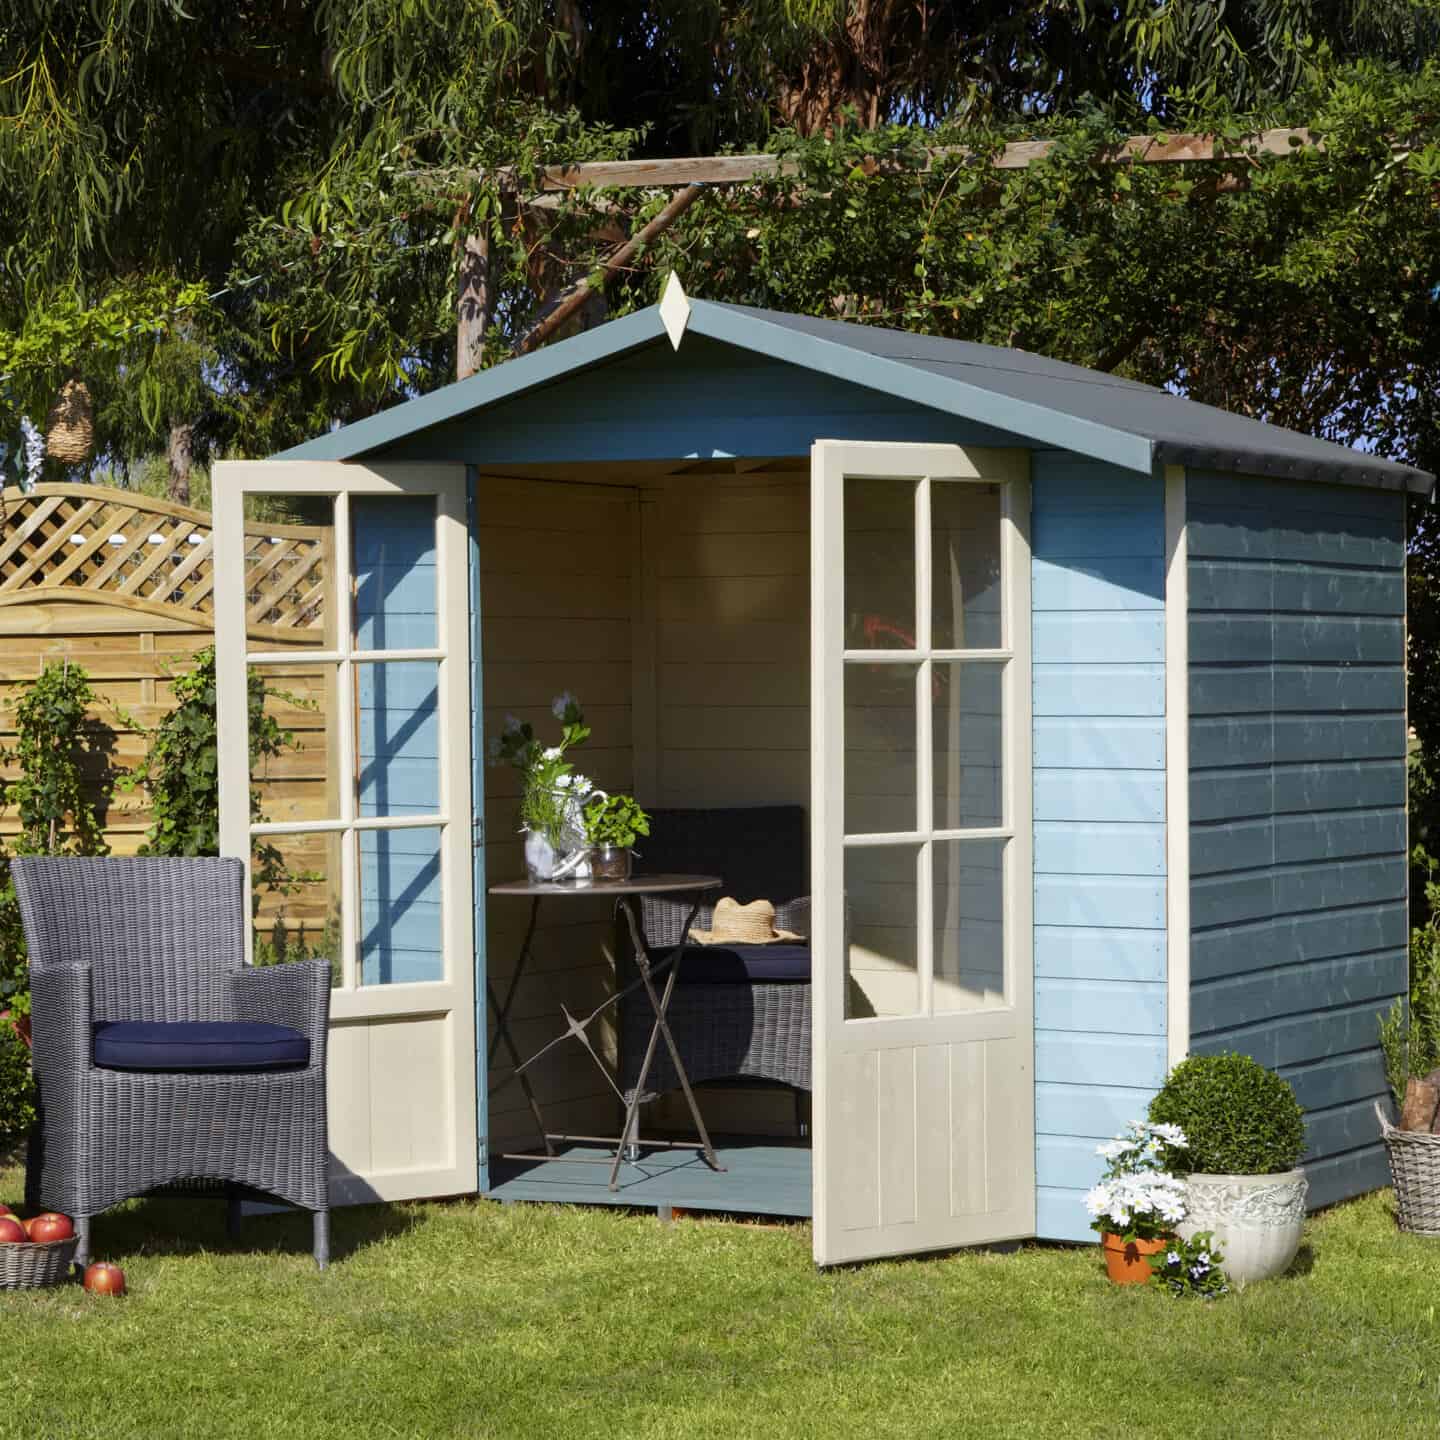 A garden shed painted blue and used as a summer house